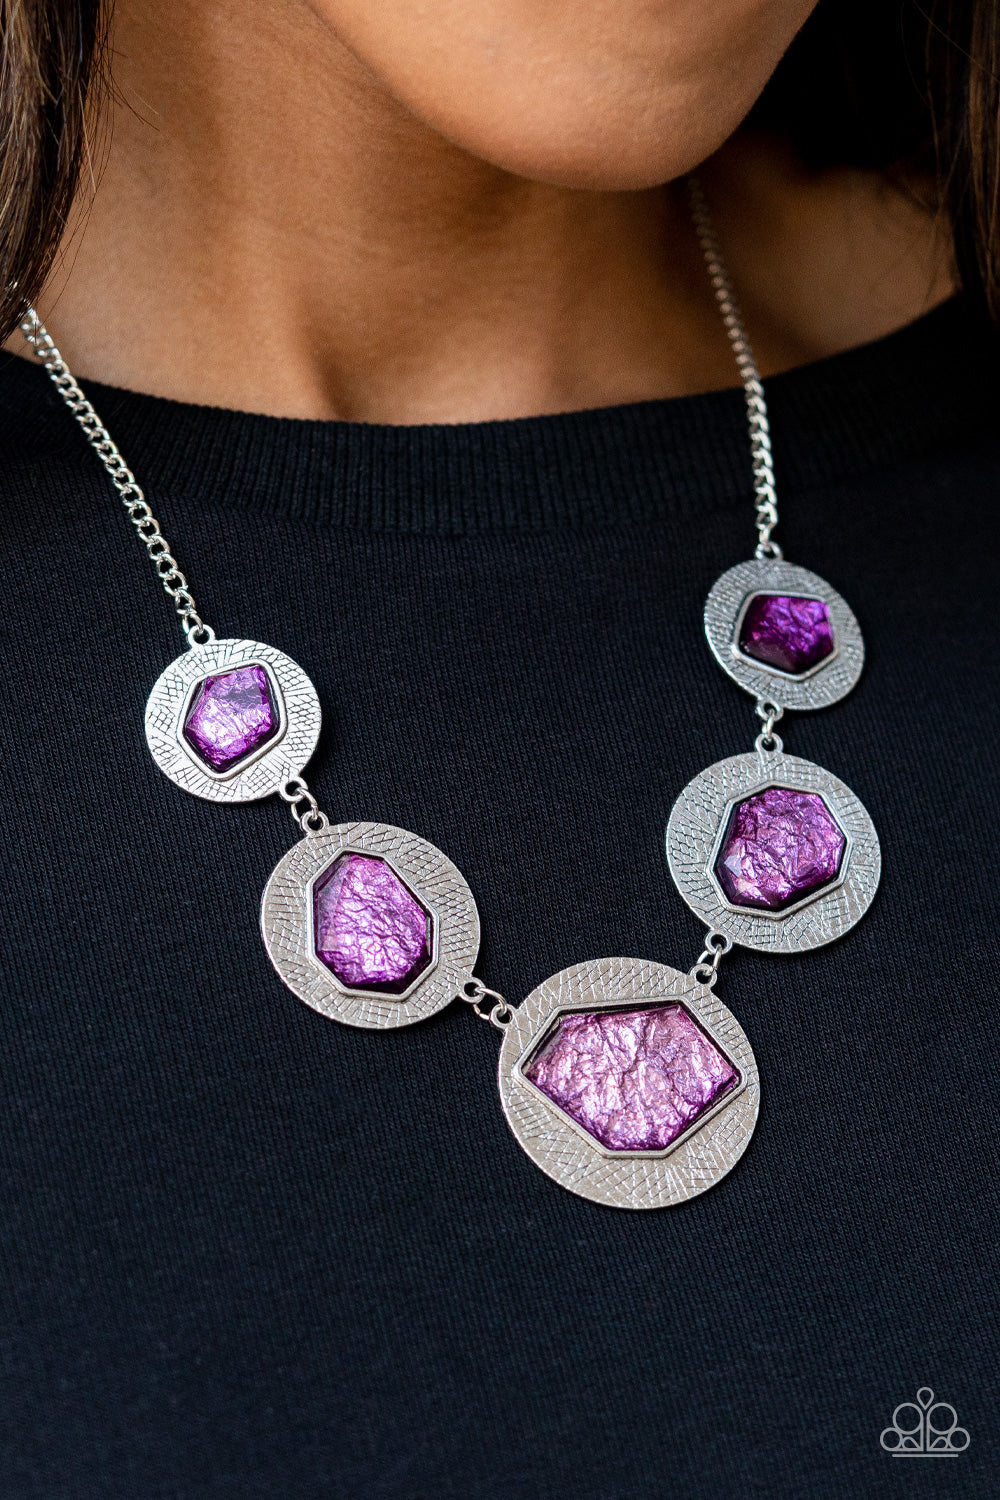 Raw Charisma Purple Necklace - Paparazzi Accessories  Featuring a refracted shimmer, asymmetrical, glassy purple gems sparkle atop textured silver discs as they delicately link into an edgy statement piece below the collar. Features an adjustable clasp closure.  Sold as one individual necklace. Includes one pair of matching earrings.